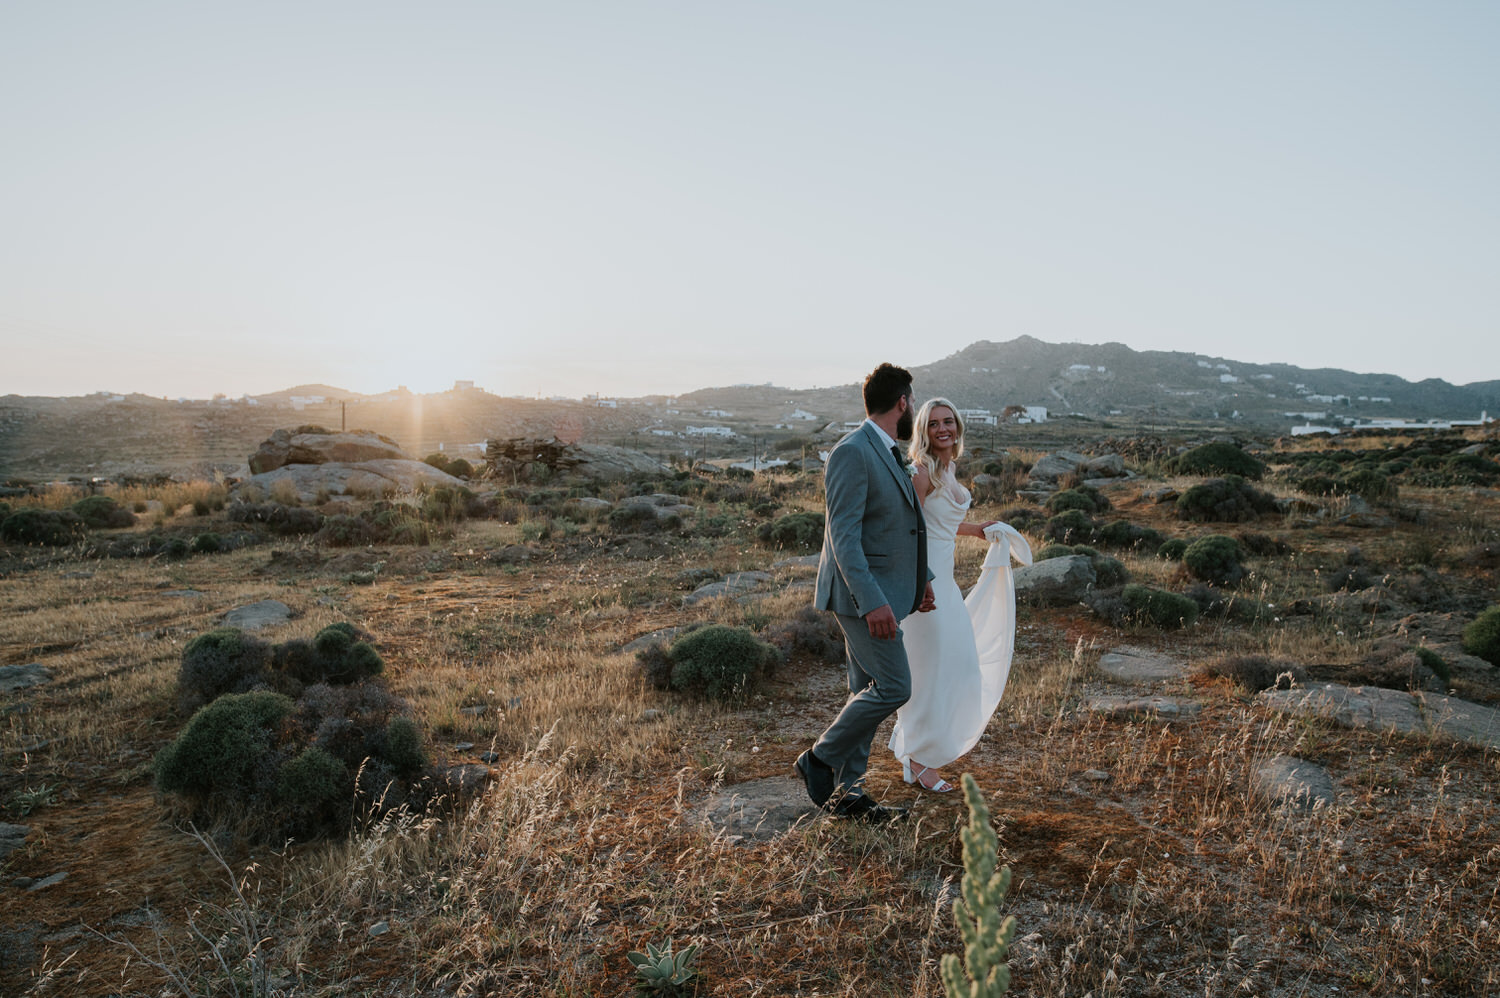 Mykonos wedding photographer: bride and groom looking at each other walking in sunset light through grassy field.